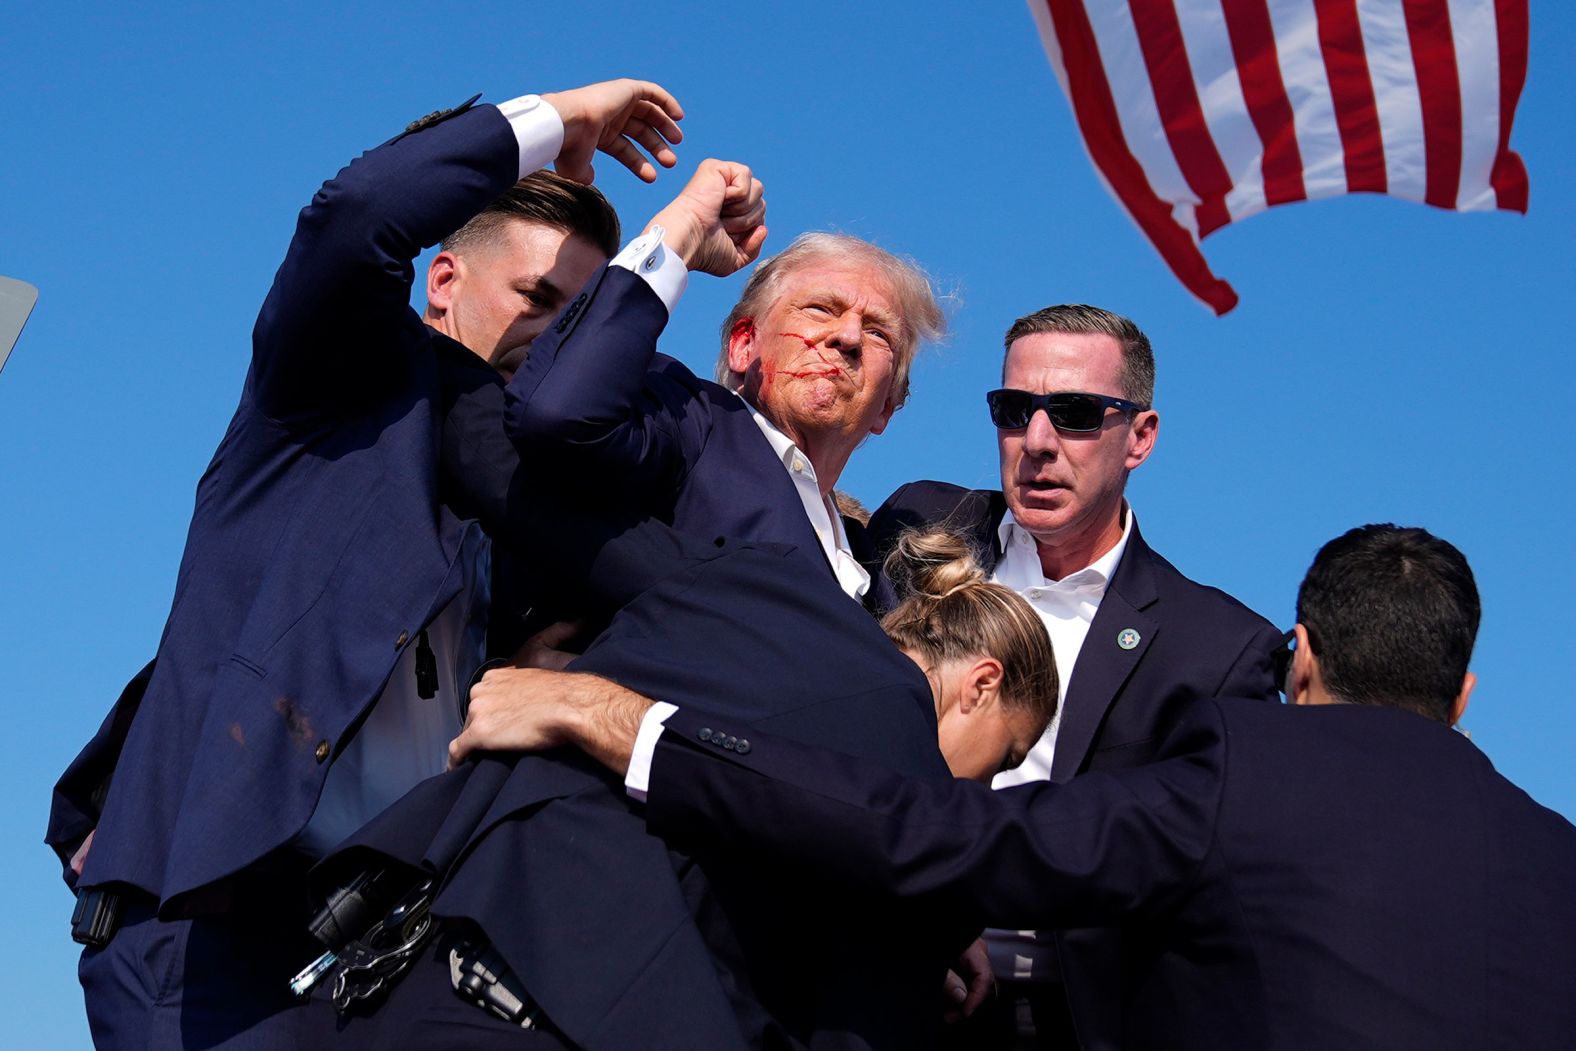 Trump, with blood on his face, raises his fist to the crowd as he is surrounded by Secret Service agents at a campaign rally in Butler, Pennsylvania, in July 2024. <a href="https://www.cnn.com/2024/07/13/politics/trump-injured-pennsylvania-rally/index.html" target="_blank">Trump was injured</a> in a shooting that the FBI said was an assassination attempt.